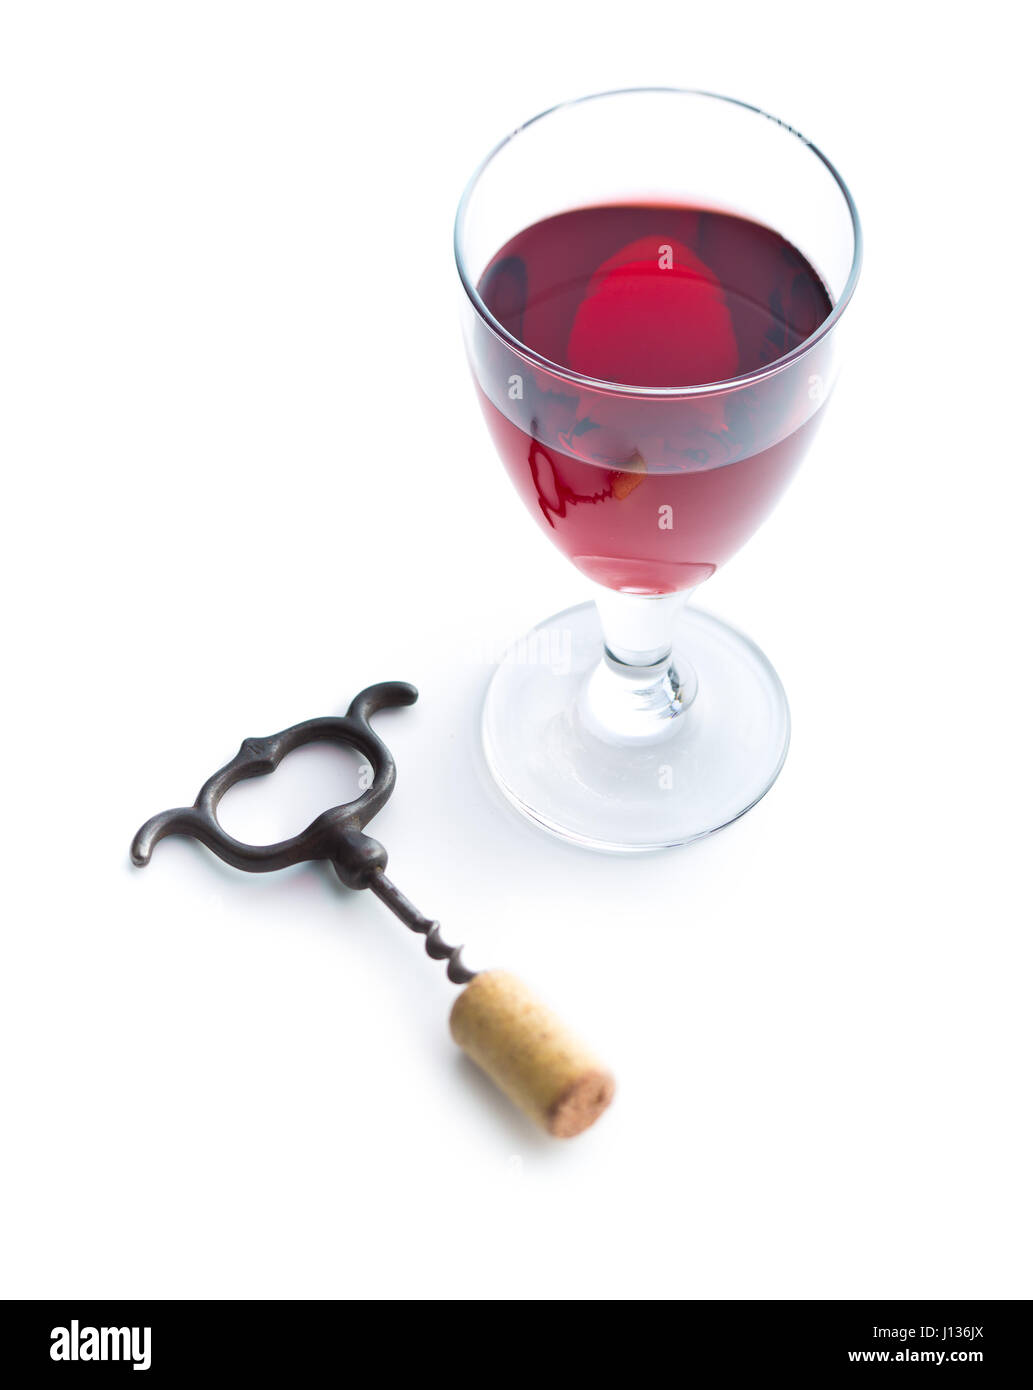 Glass of red wine and corkscrew isolated on white background. Stock Photo